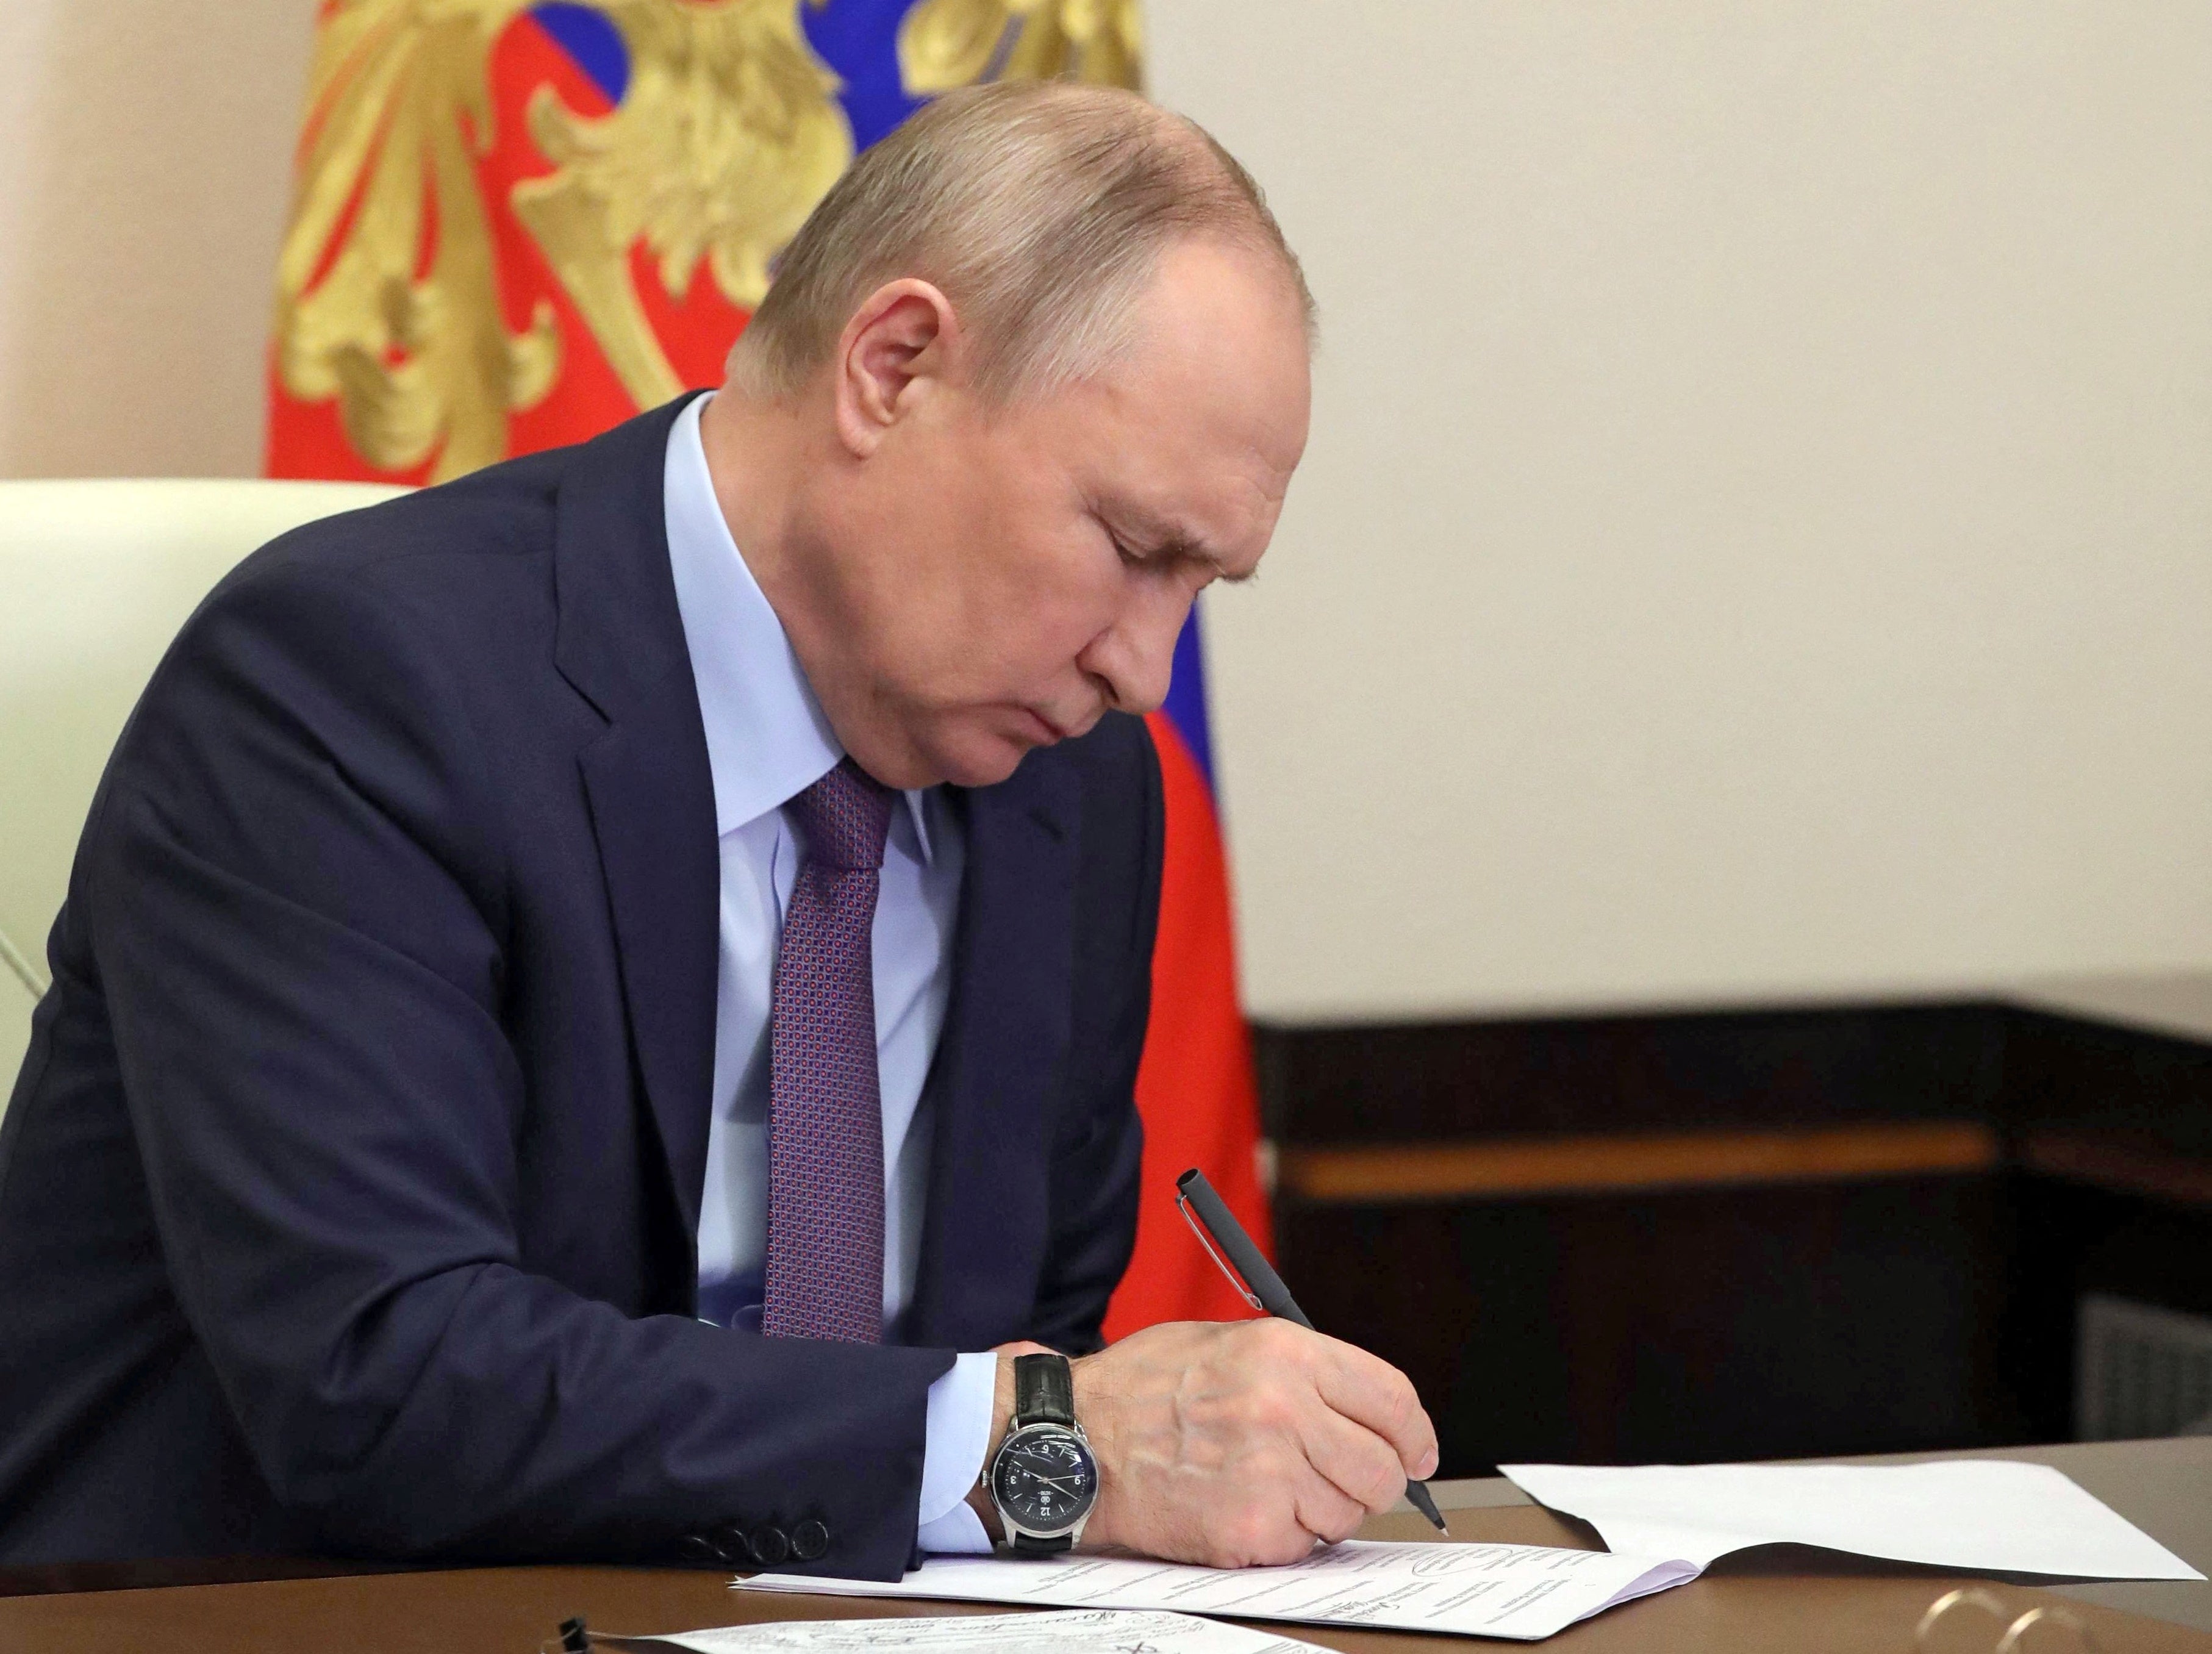 Putin chairs a meeting of the country’s oil and gas industry via a video link at a residence outside Moscow on Thursday